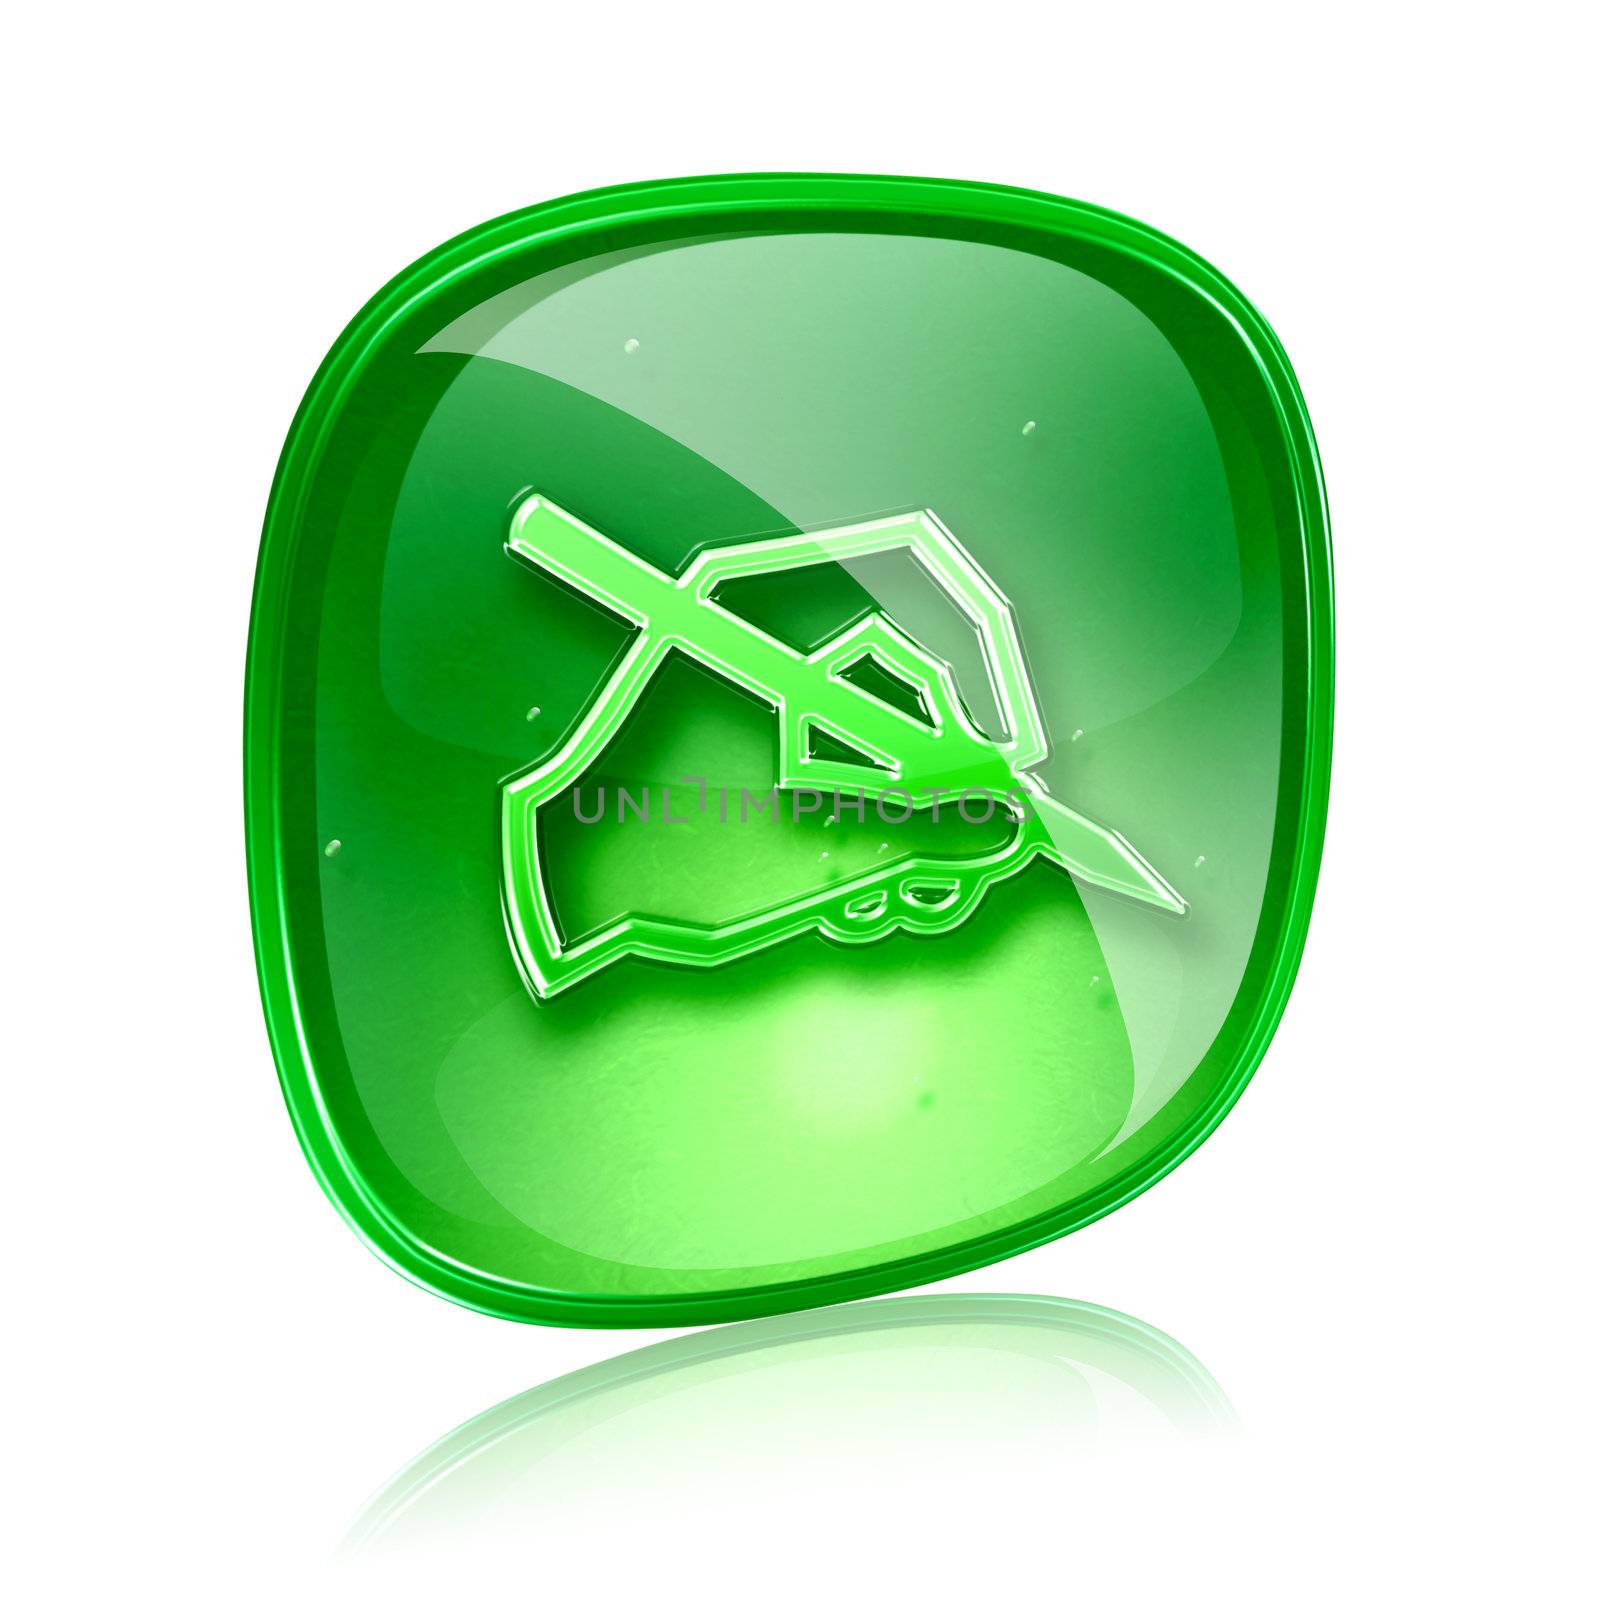 email icon green glass, isolated on white background.